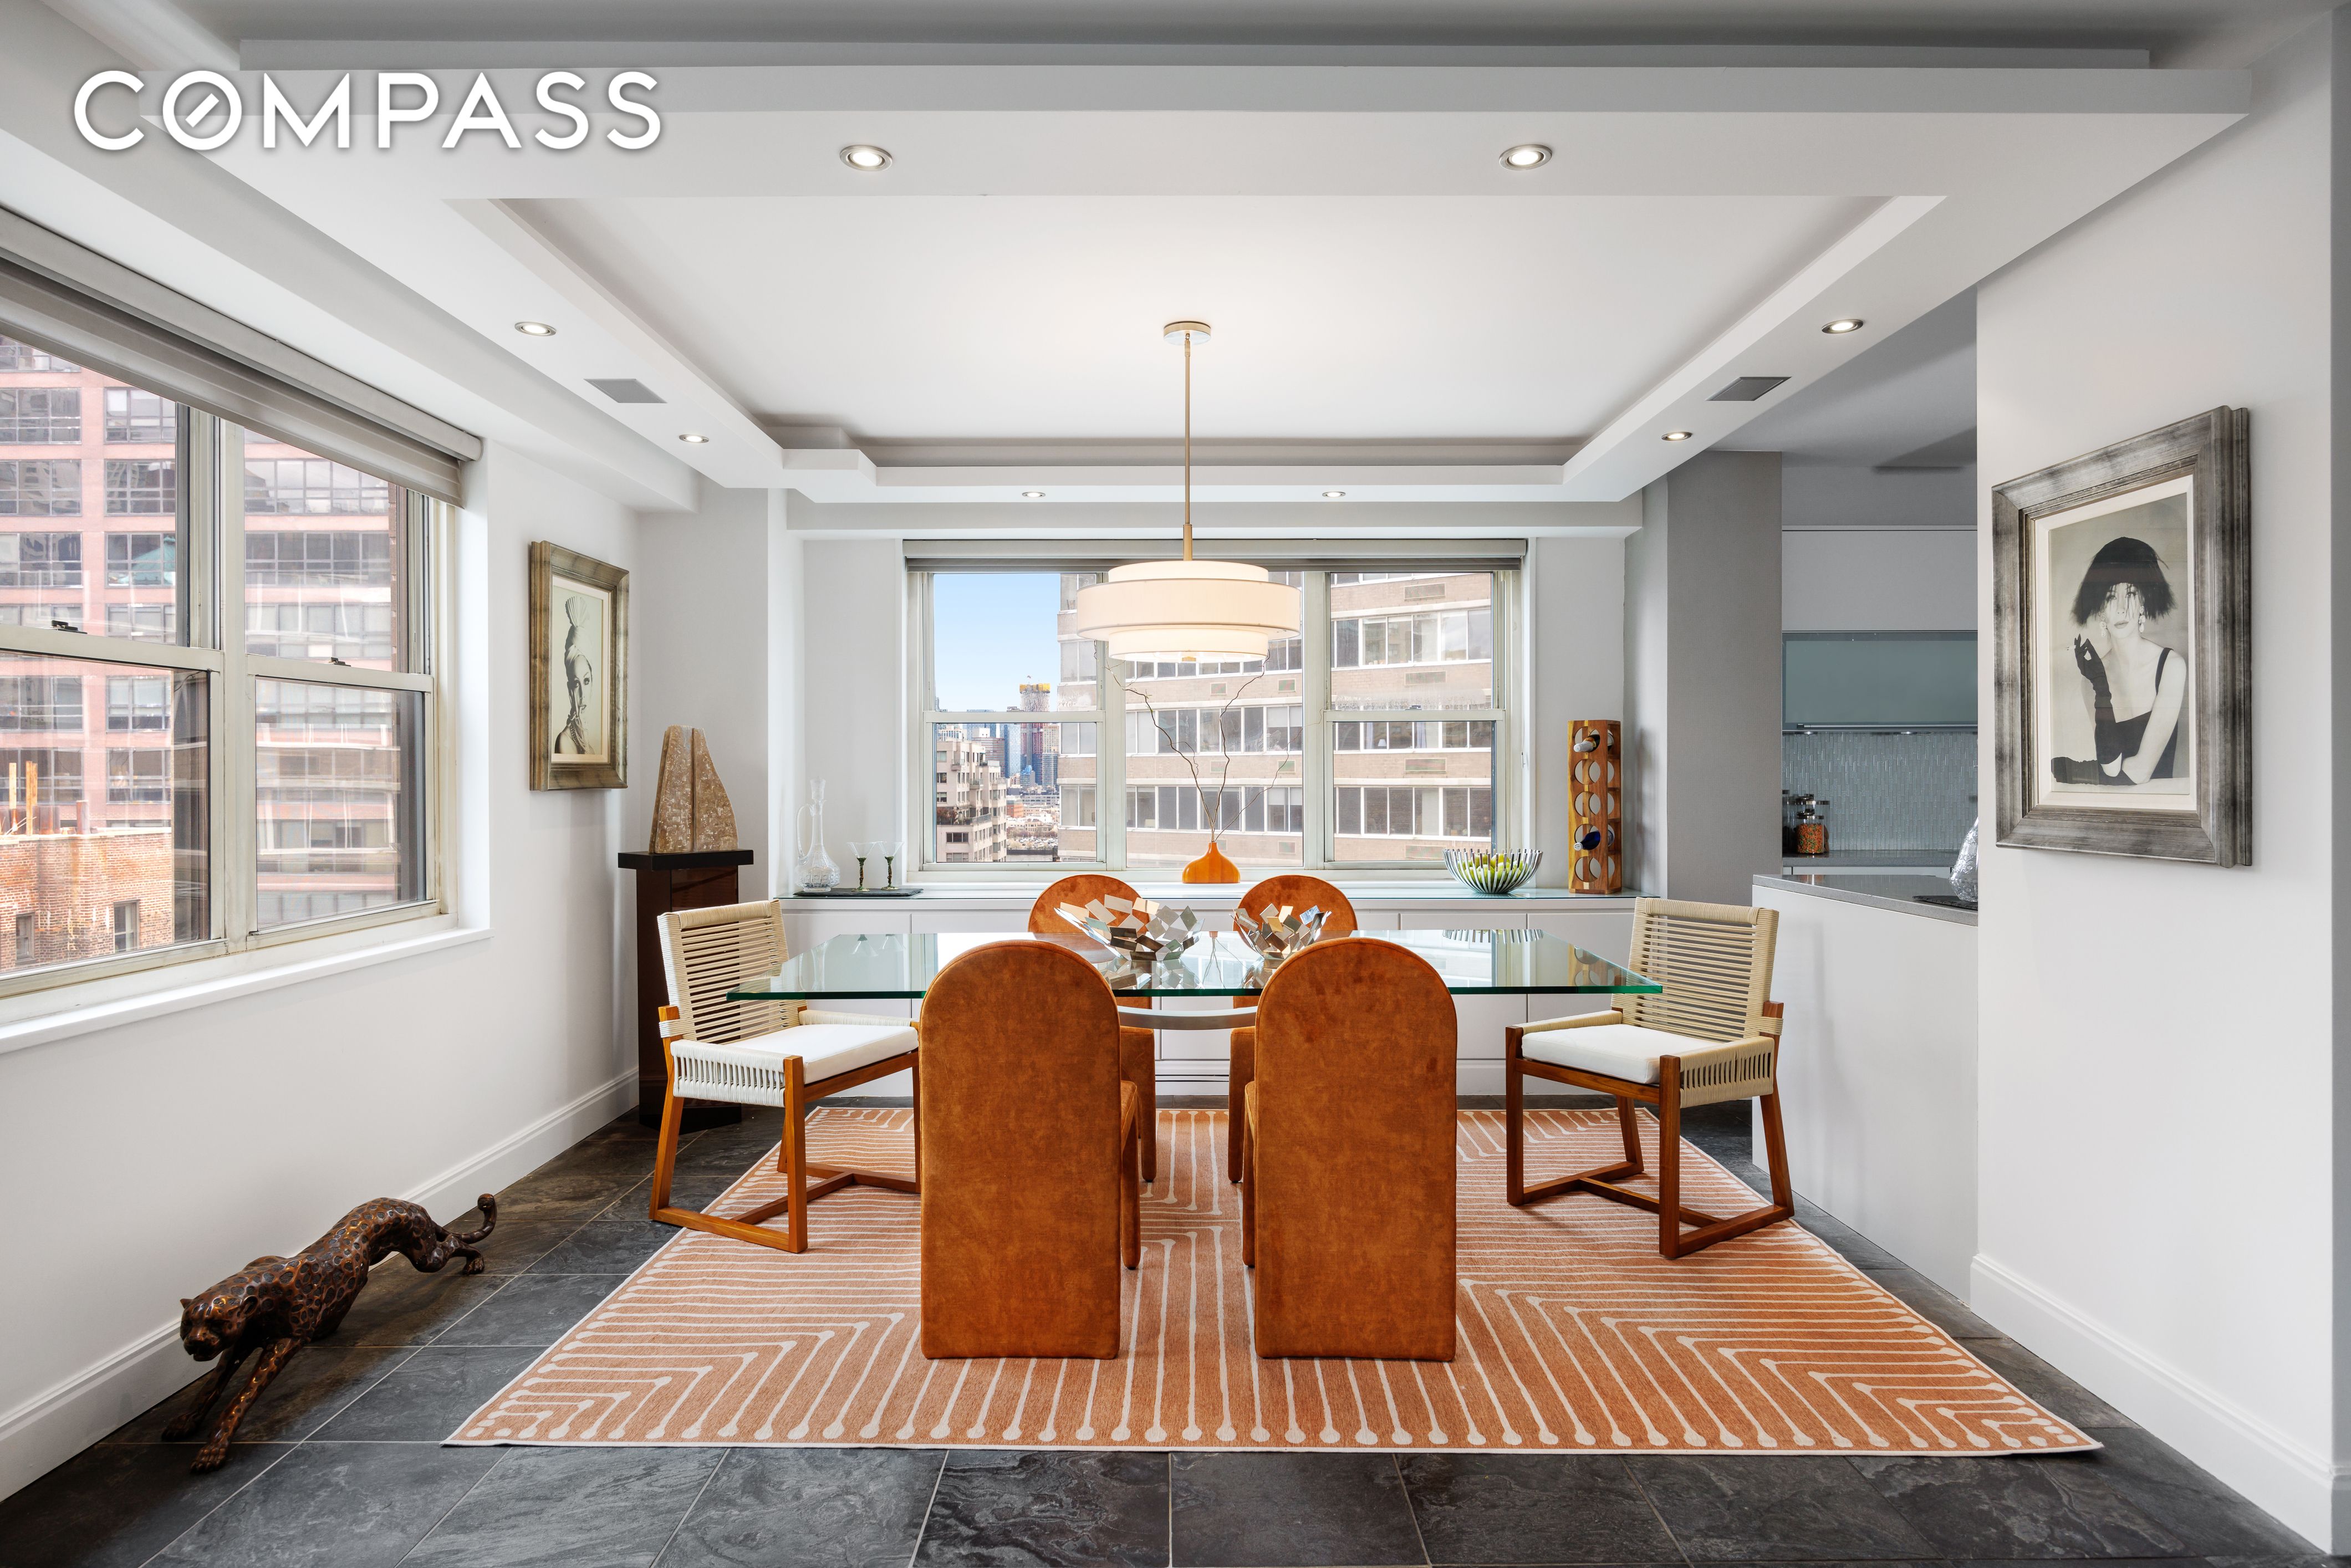 400 East 54th Street 19Efg, Sutton Place, Midtown East, NYC - 4 Bedrooms  
4 Bathrooms  
9 Rooms - 